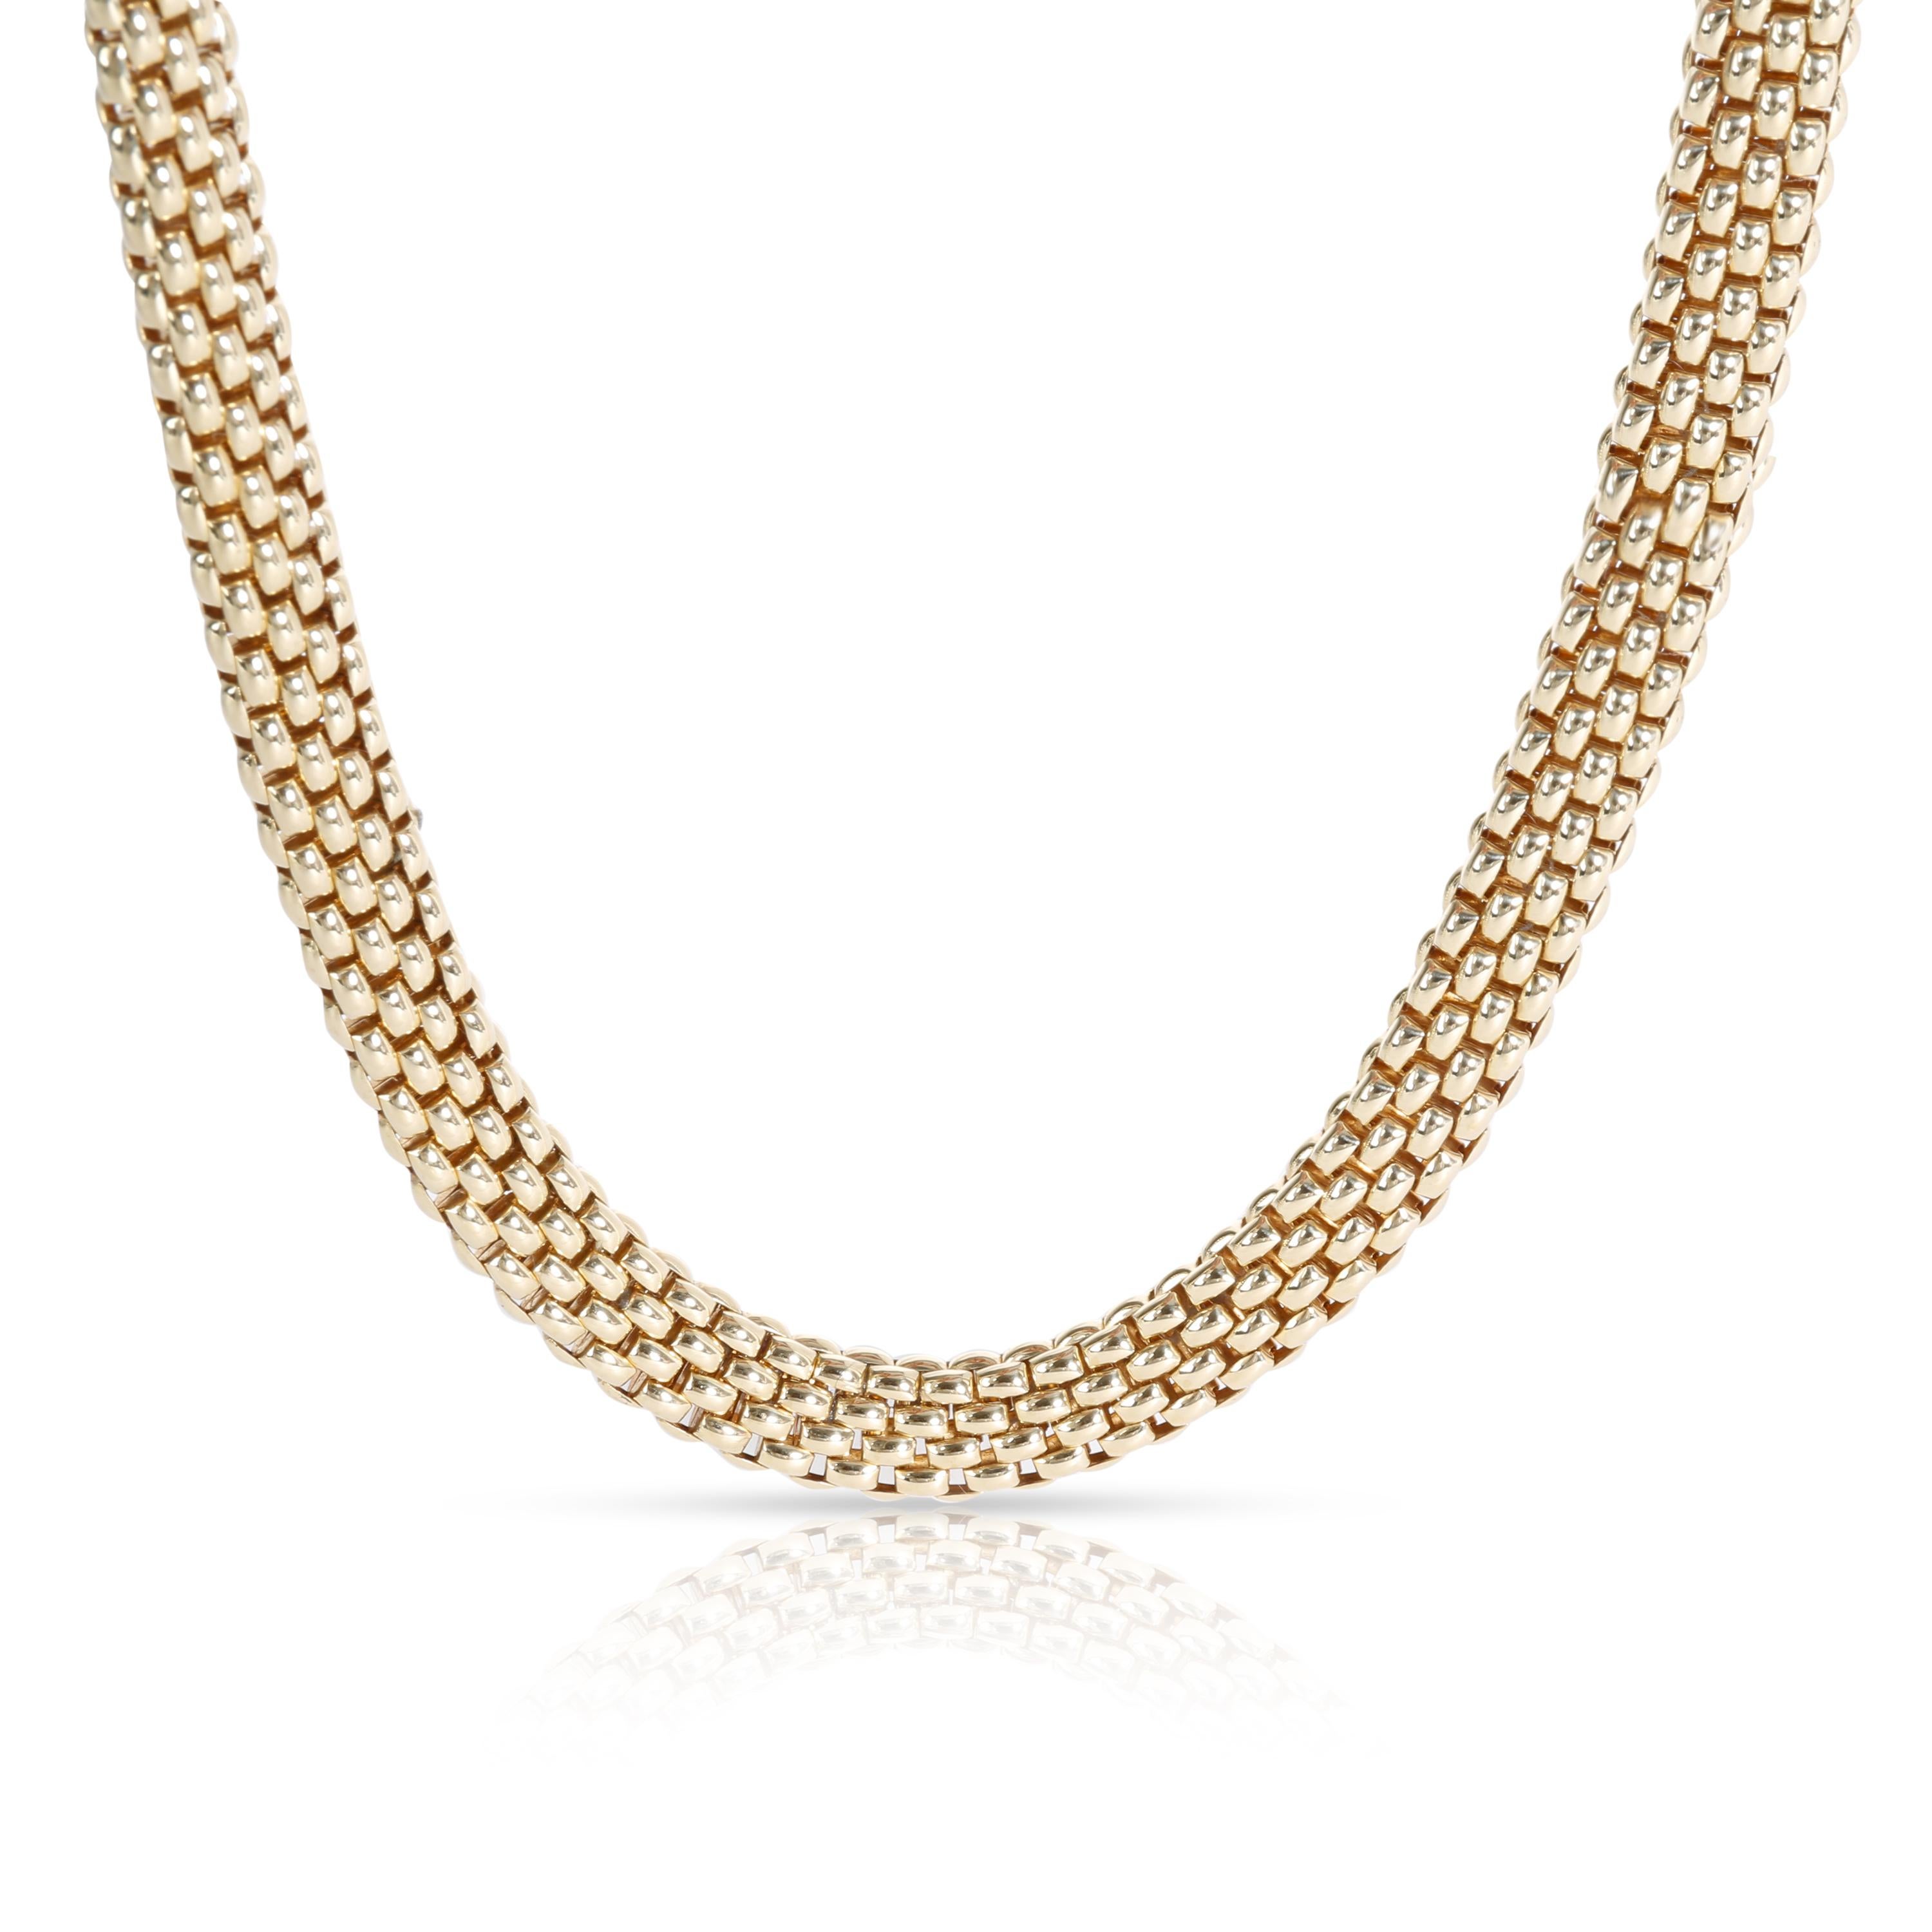 Women's Fope Love Nest Necklace in 18KT Yellow Gold